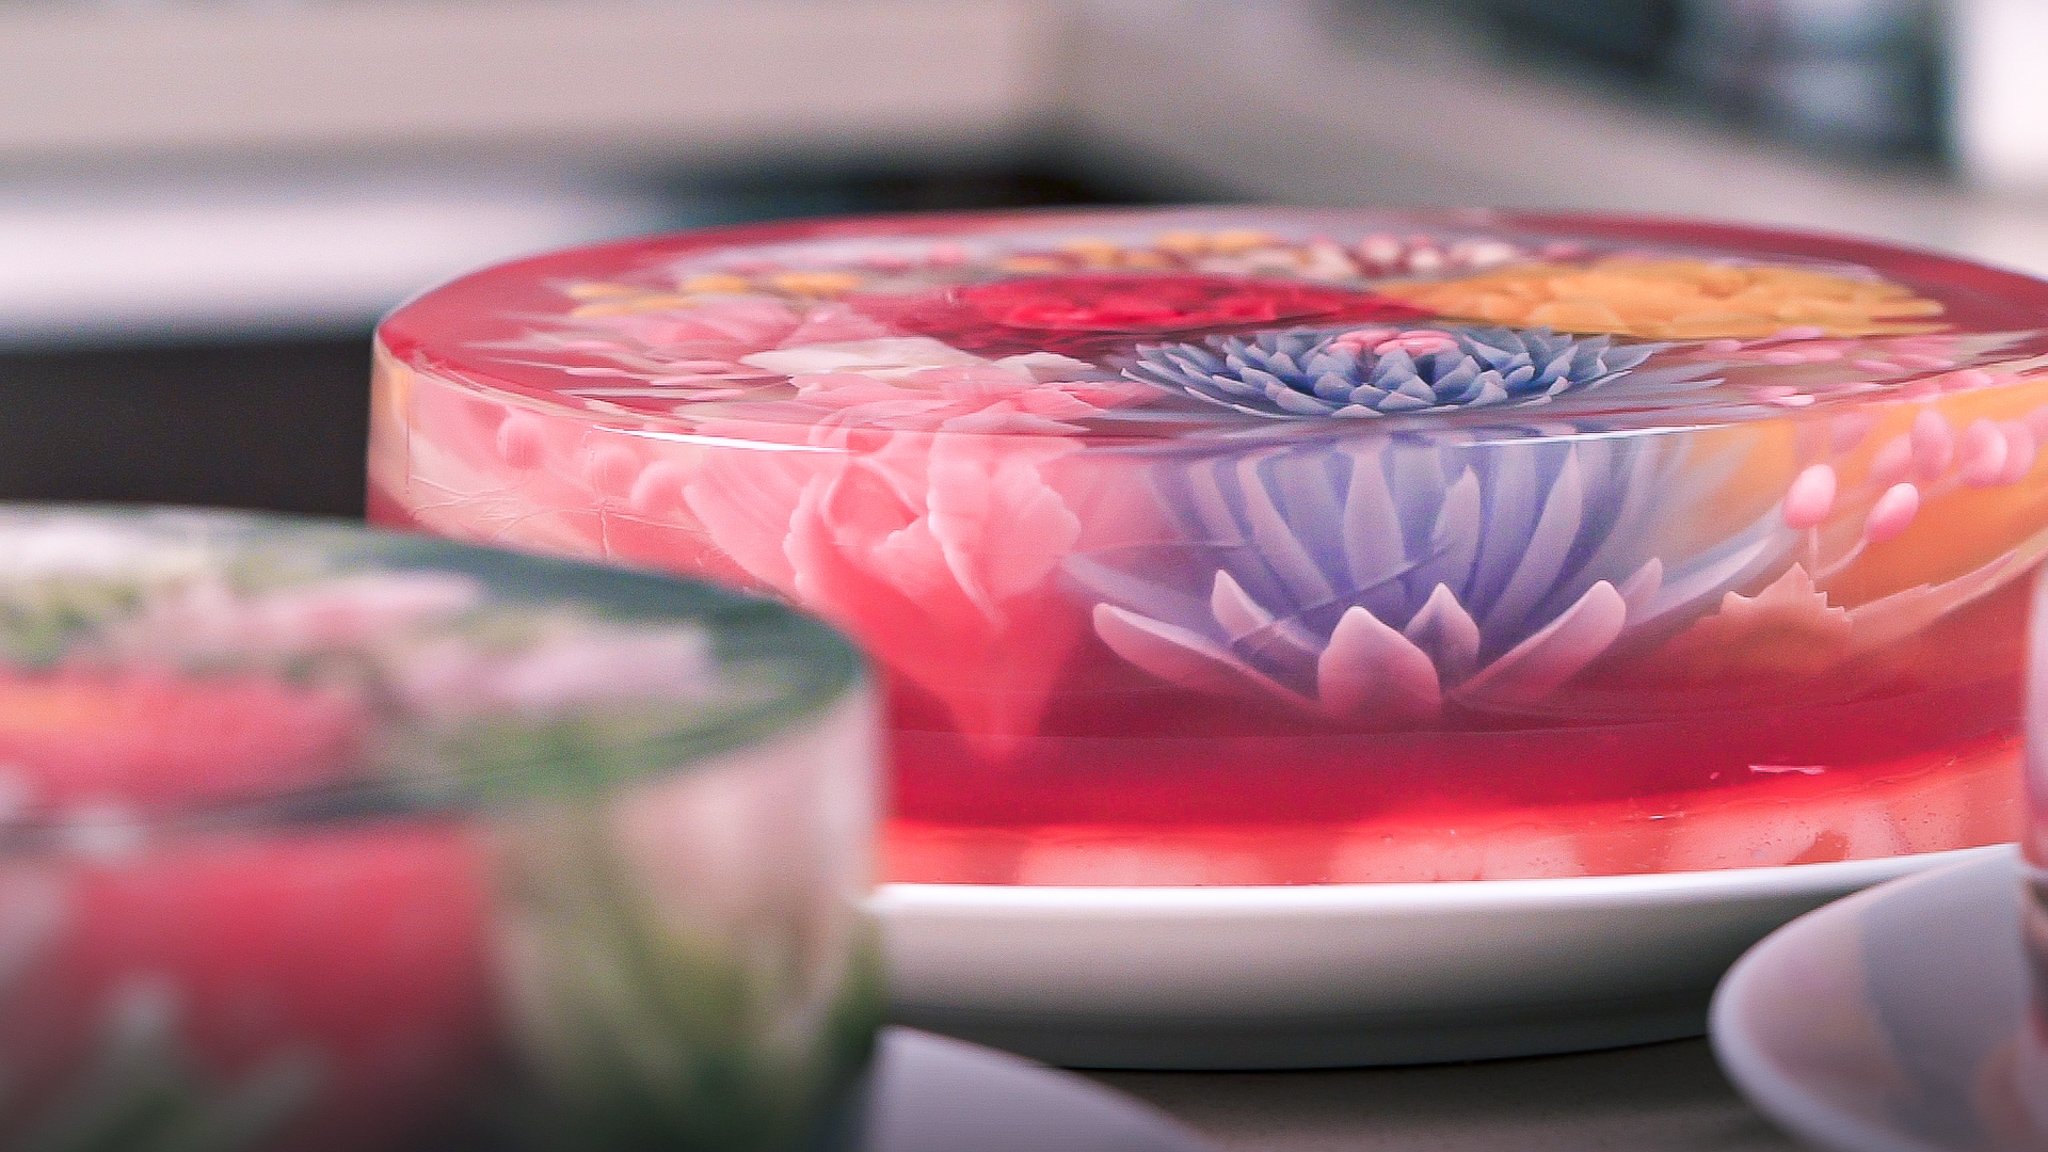 3D Jelly Cakes by Siew Boon That Look Too Pretty to Eat - Design Swan